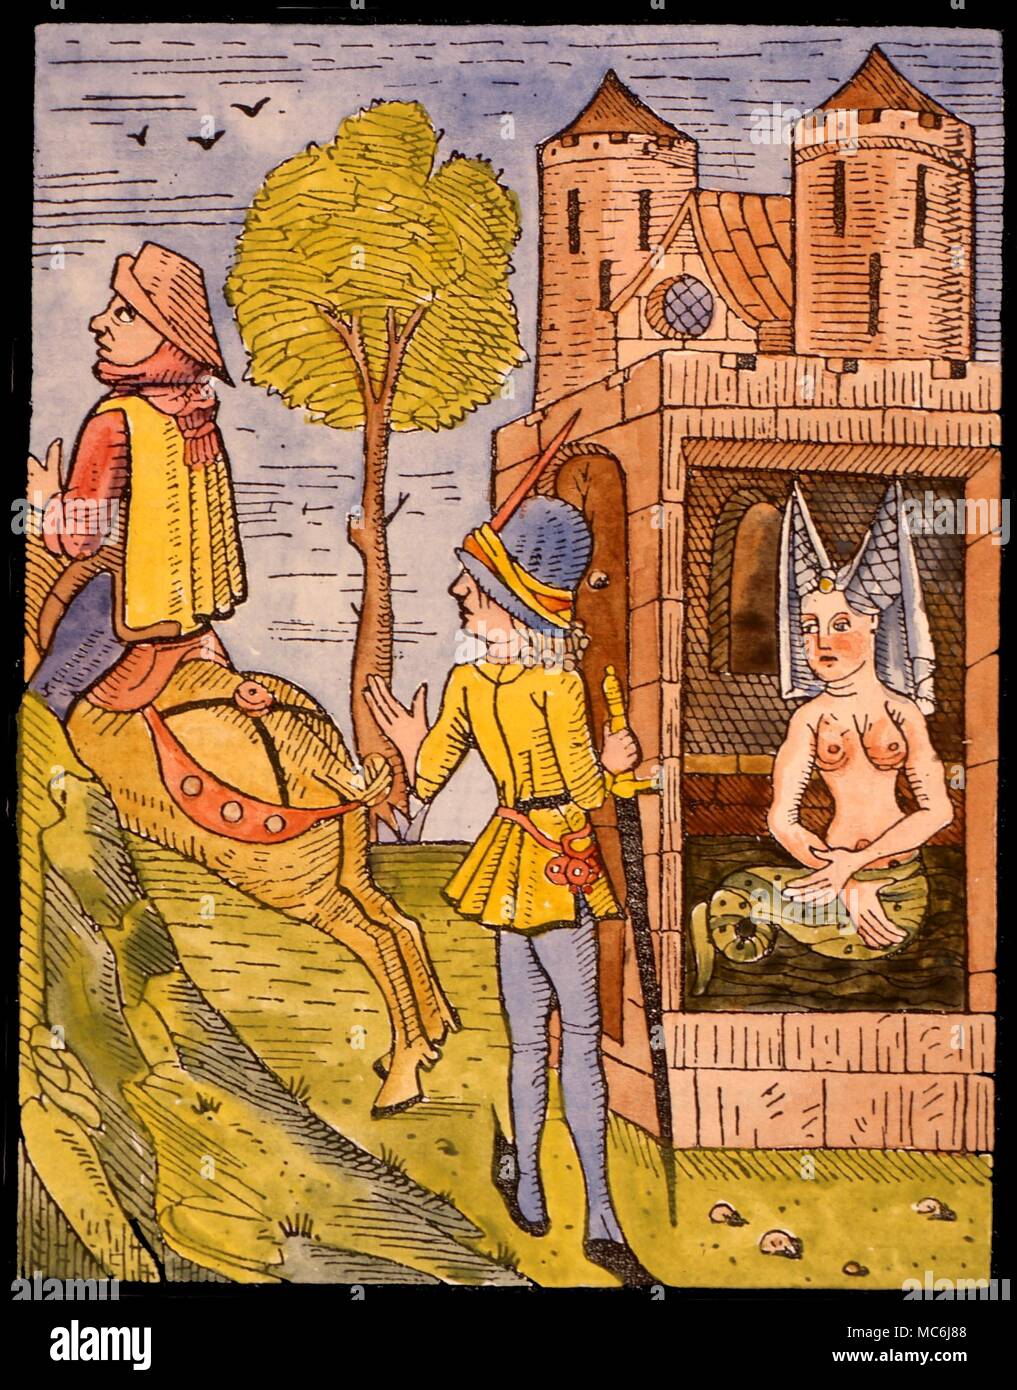 FAIRY STORIES - FAIRY-WIFE. Mediaeval woodcut illustration to the Fairy-wife legend of Melisande. Her husband, forwarned by a neighbour (riding away) spies upon his fairy-wife on a day she had formerly forbidden him to see her. She is serpent-tailed. Early 16th century Stock Photo